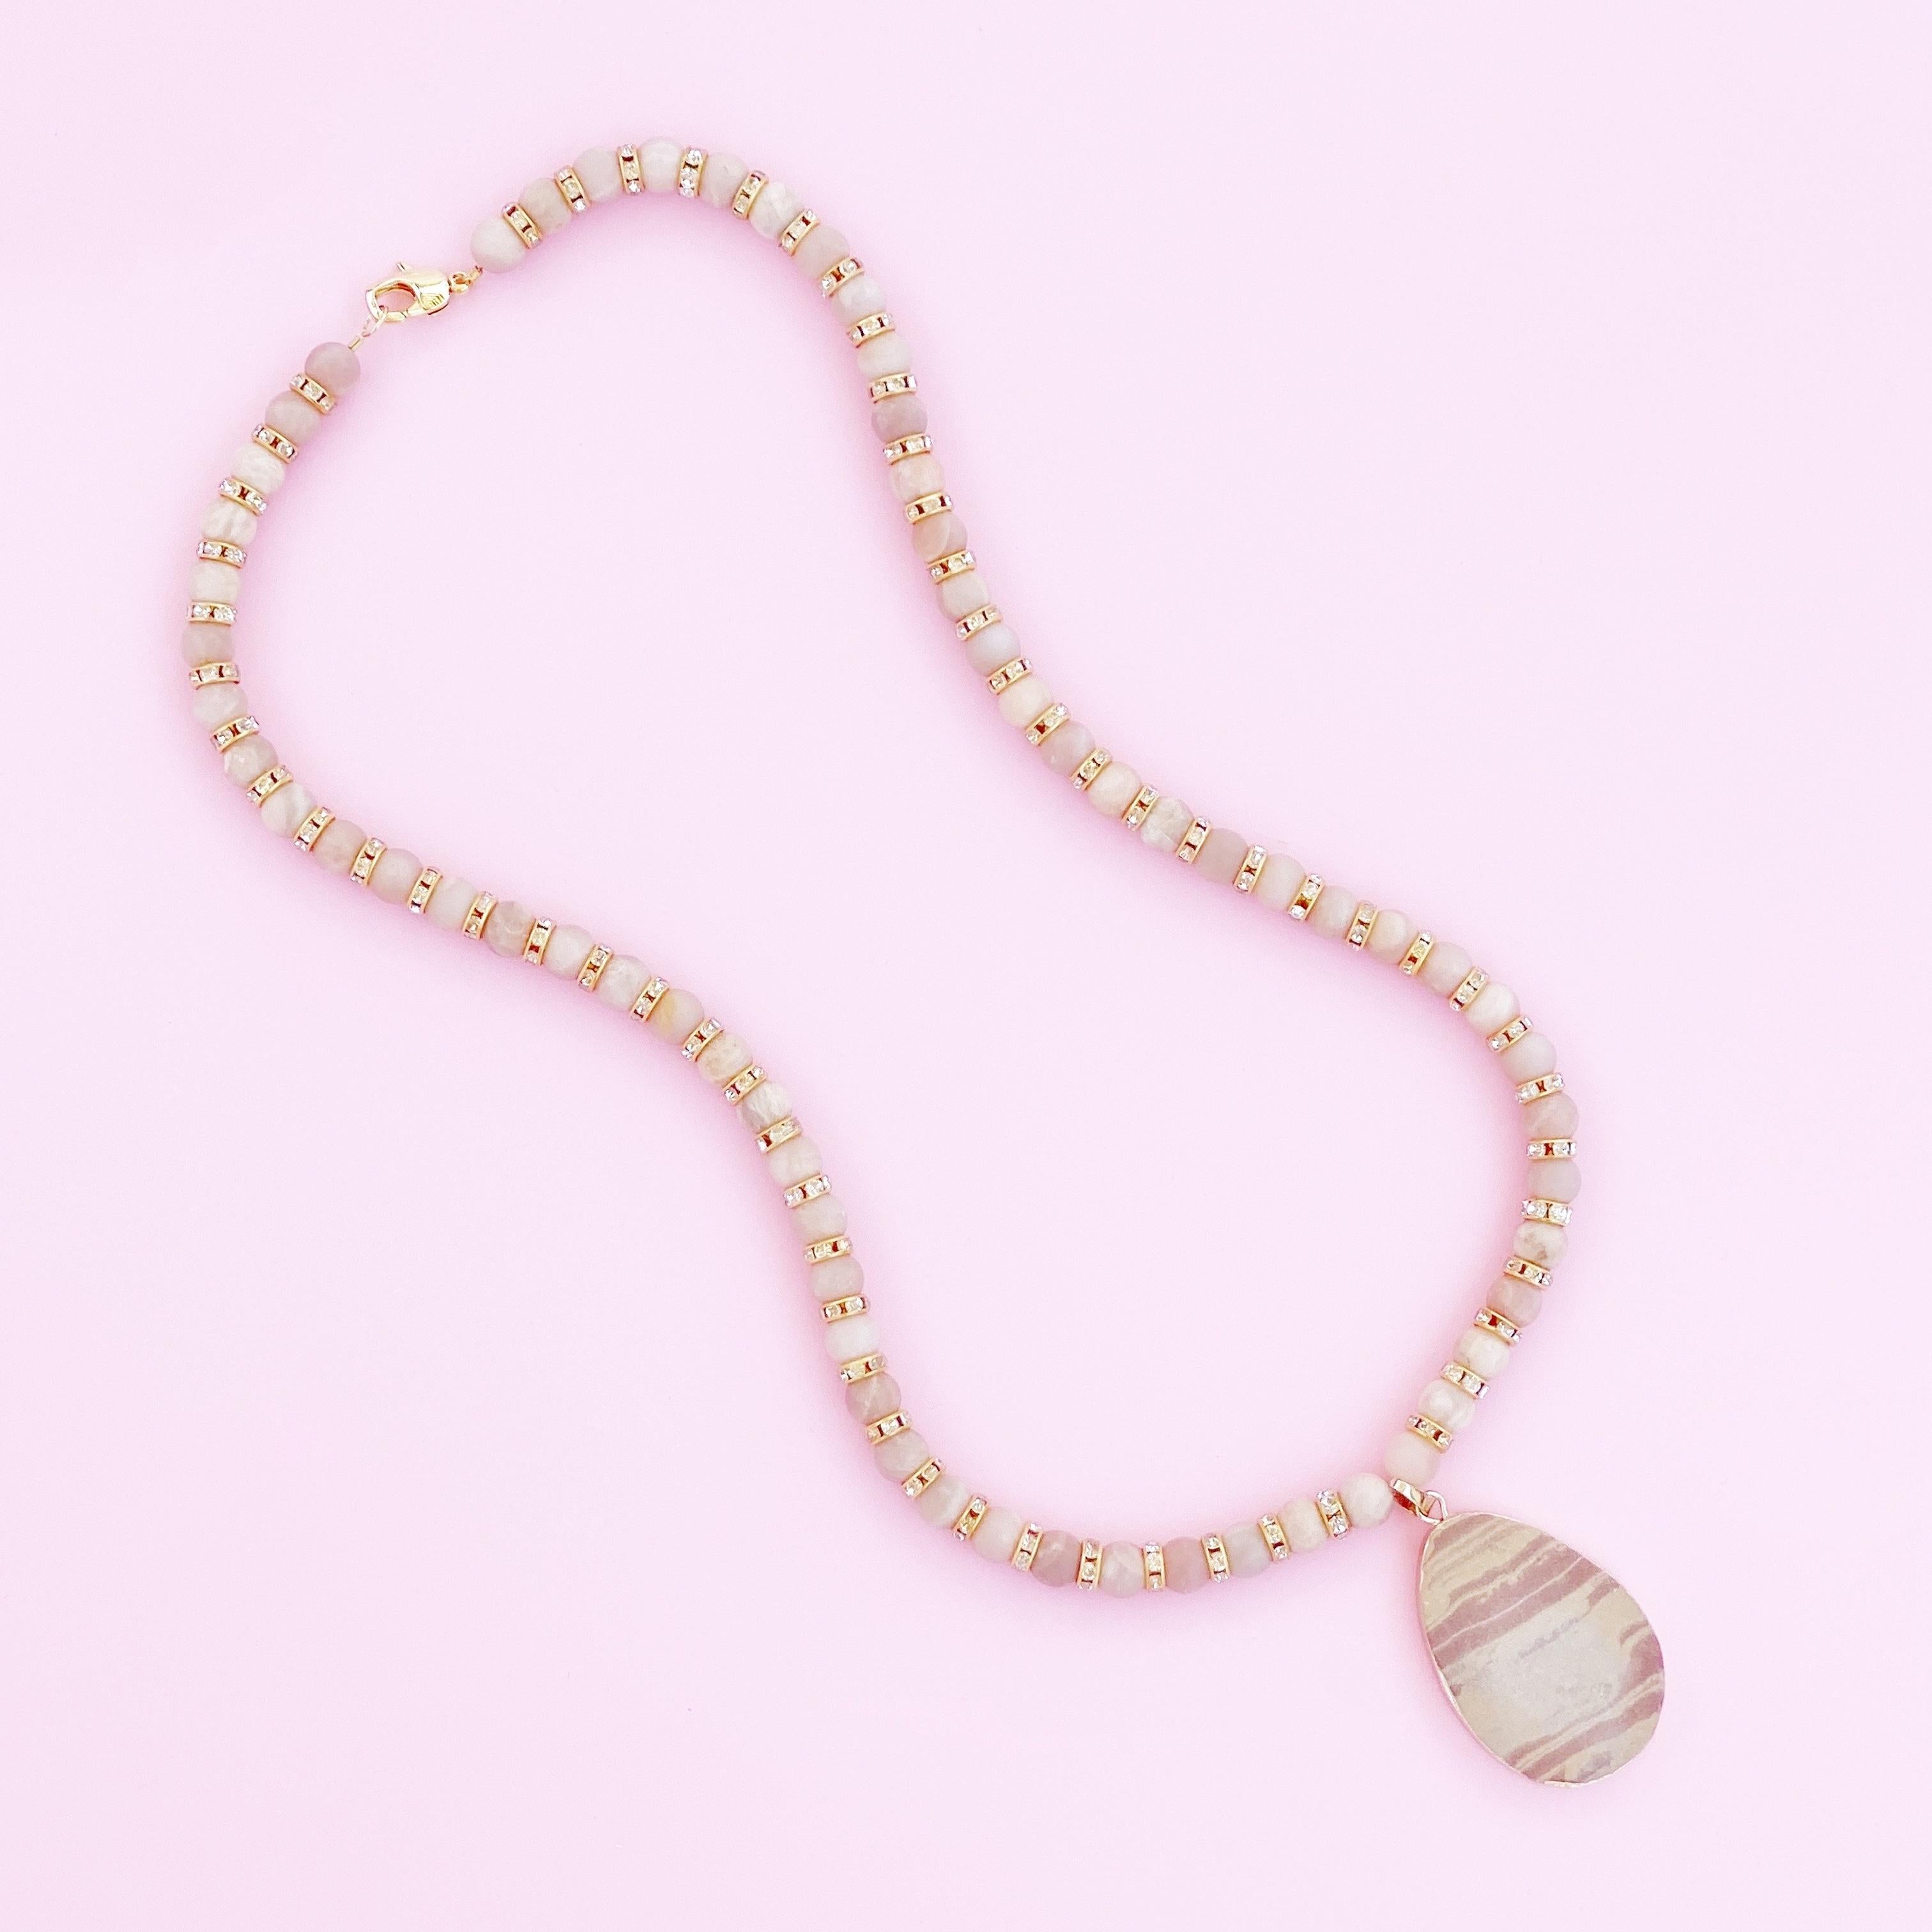 8mm smooth matte Pink Moonstone gemstones flanked by crystal rhinestones and gold-plated accents with a red striped druzy slice charm with gold electroplated edges.  

24